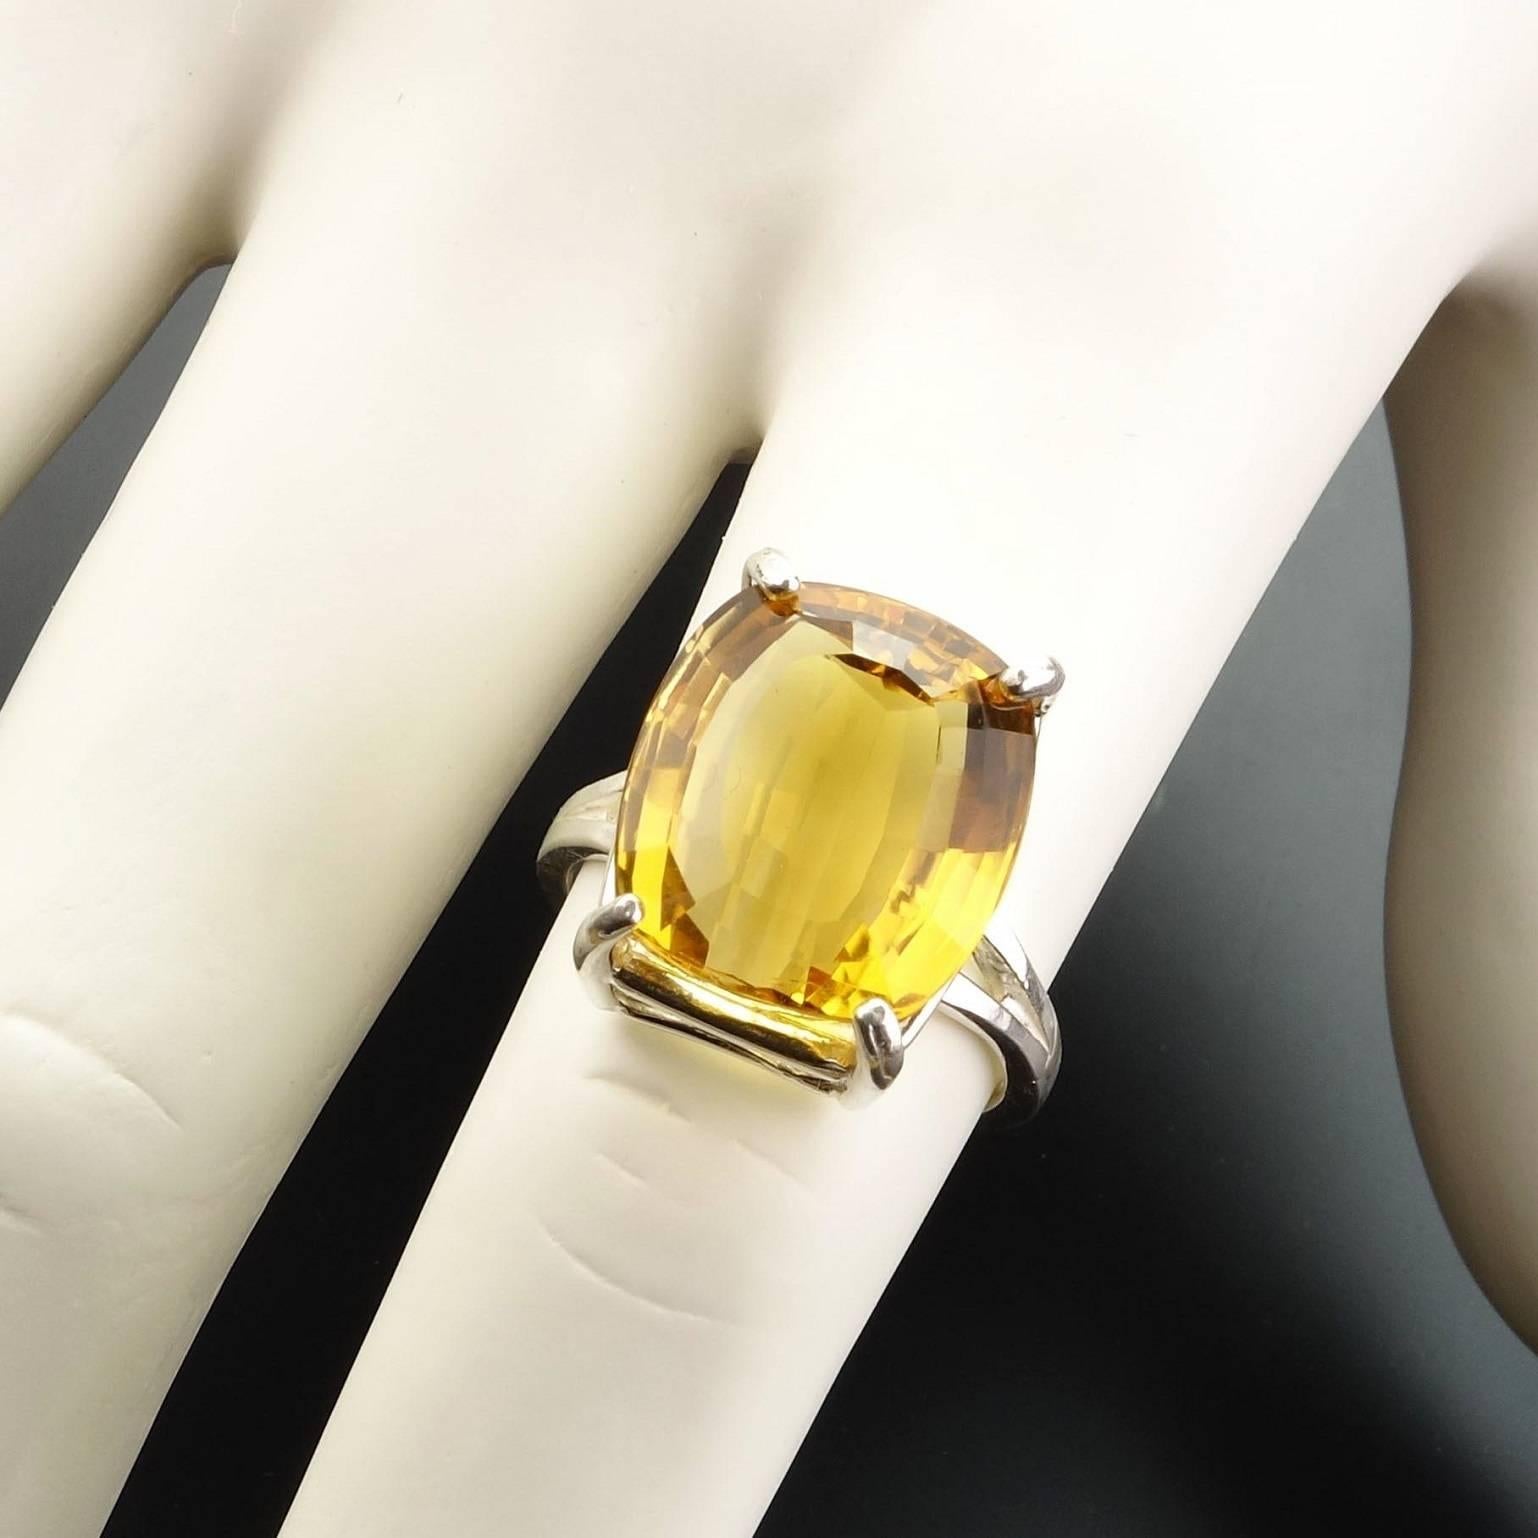 Sparkling, Brazilian step cut, cushion shape Citrine in fabulously bright flashing gold set in Sterling Silver ring. Lovely 9.87 carat Citrine with so much life,  that we found on one of our  Brazil trips.  Size 7. Citrine is the November birthstone.